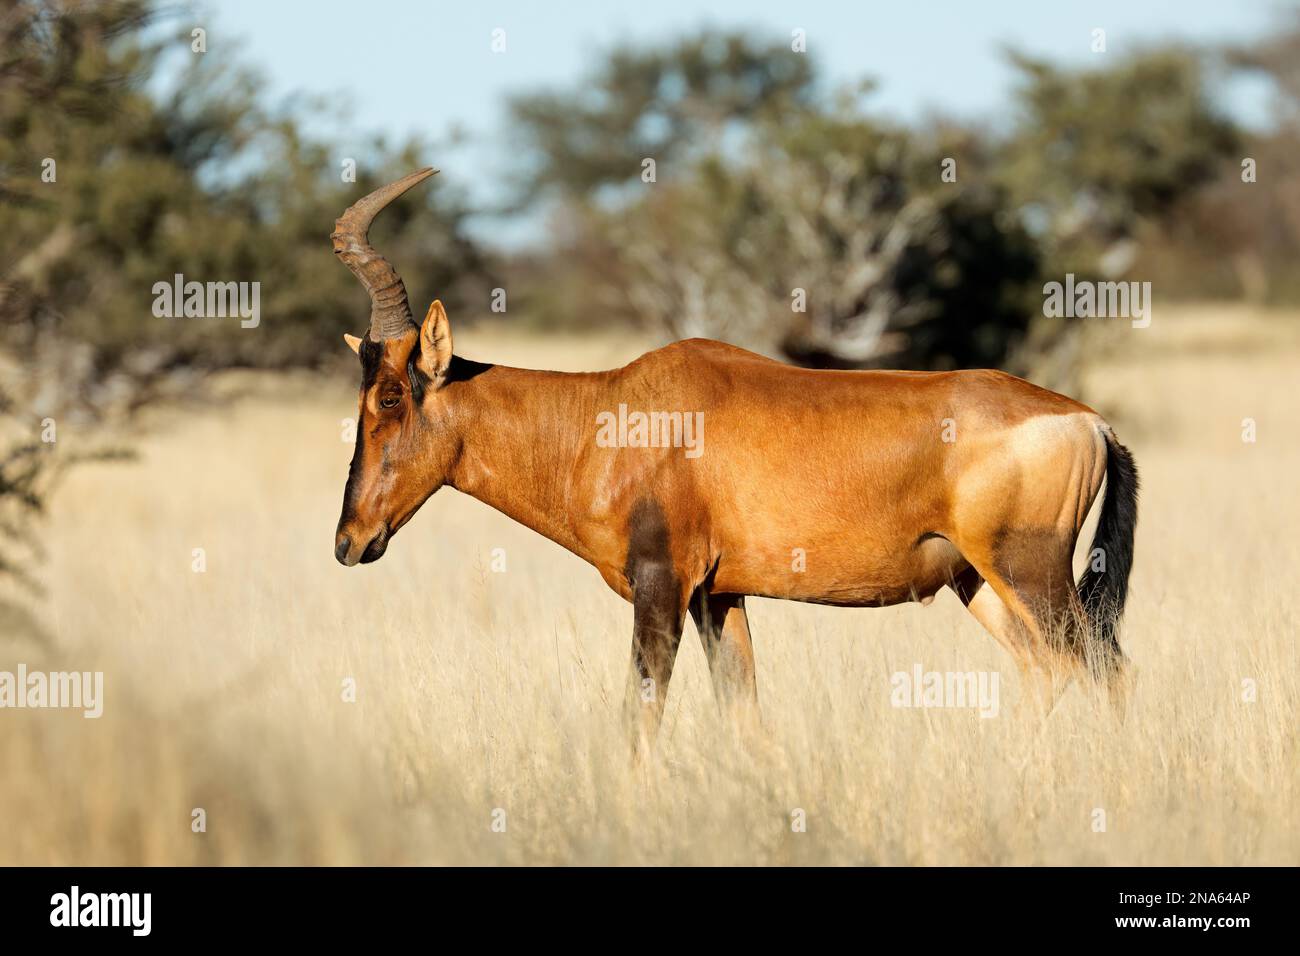 A red hartebeest (Alcelaphus buselaphus) in open grassland, Mokala National Park, South Africa Stock Photo